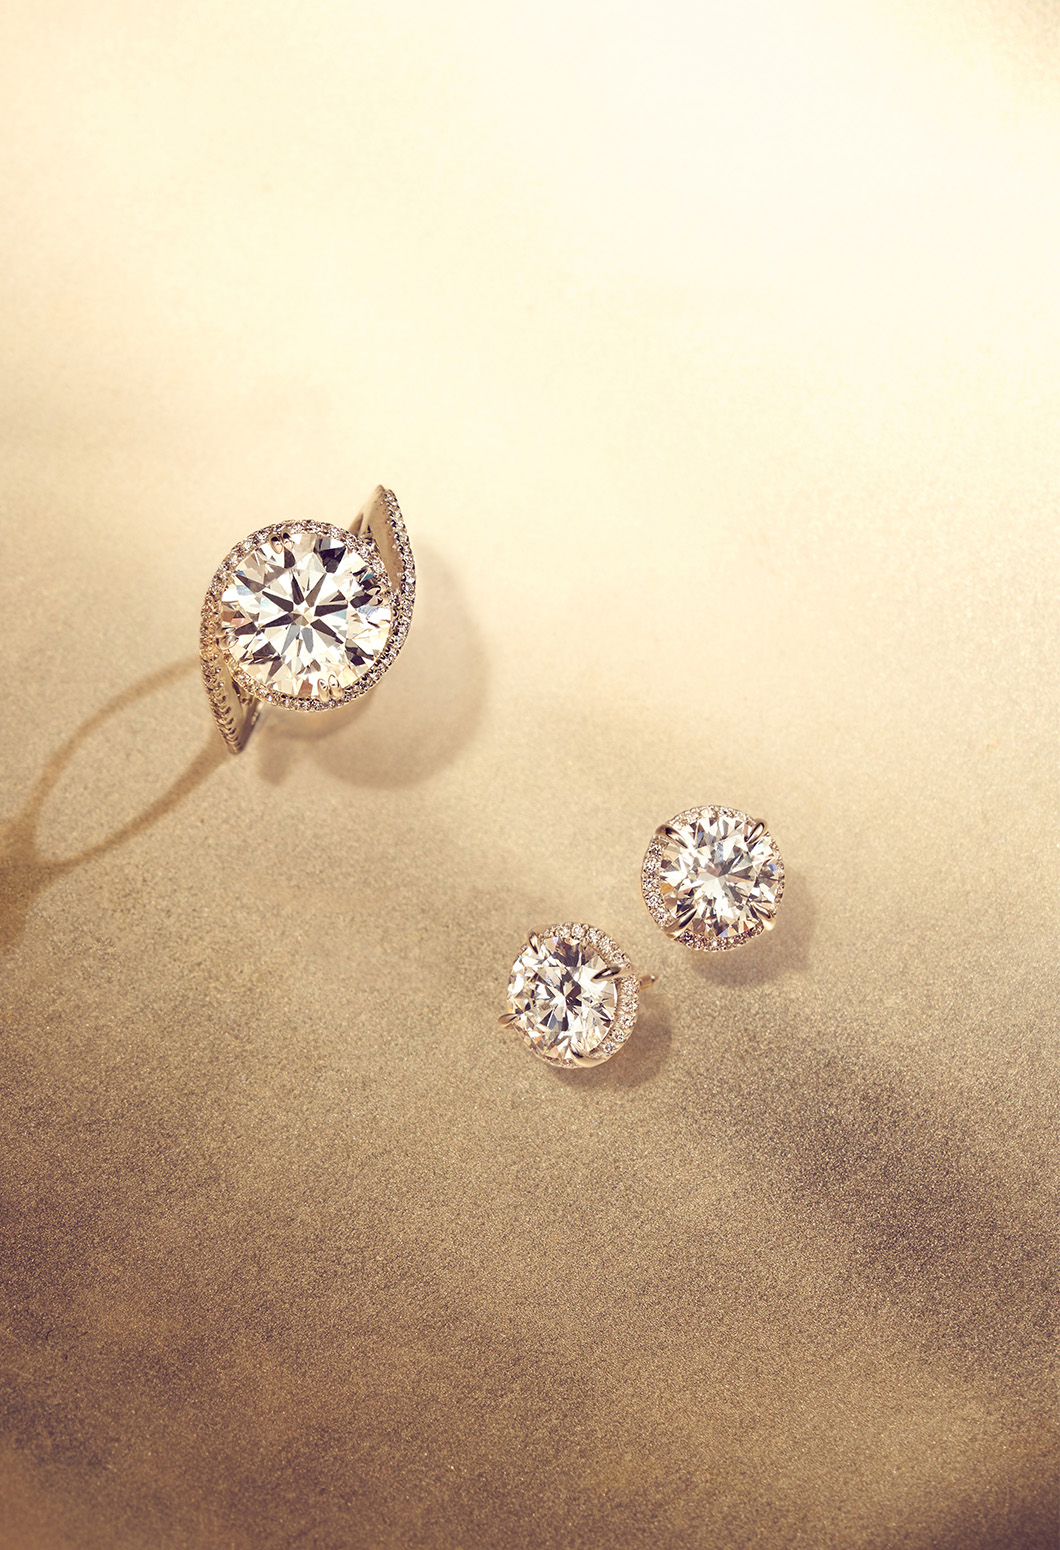 Part of a Pair, One of a Kind: Perfectly Matched Yellow-Diamond